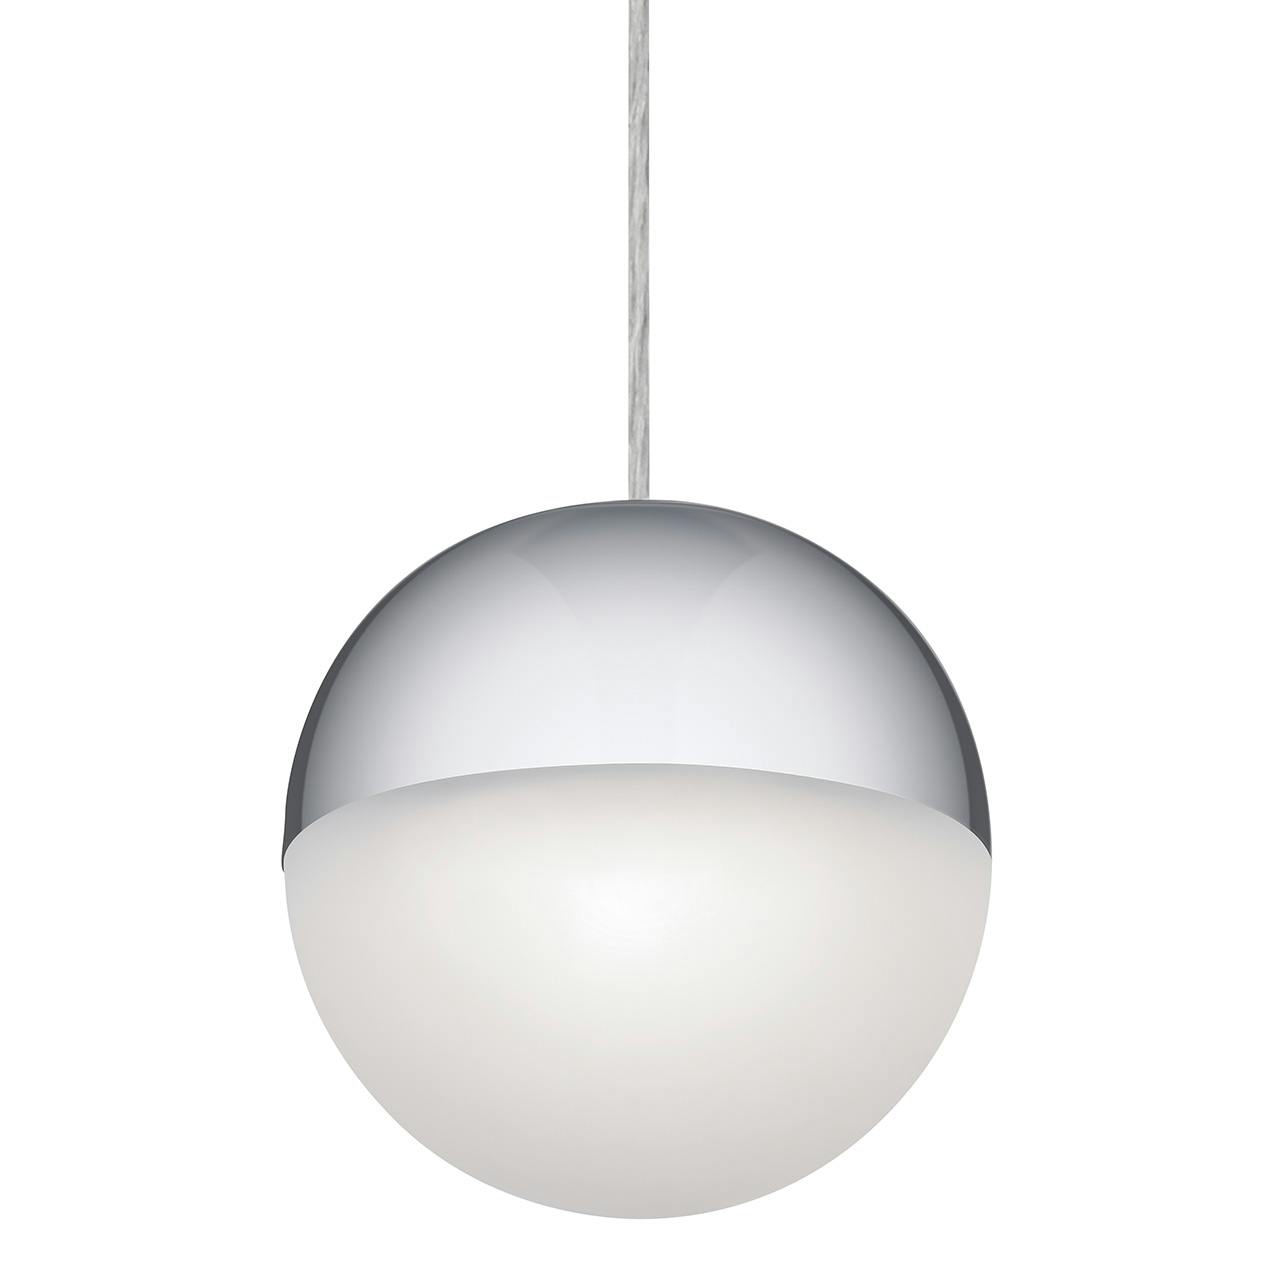 Moonlit LED 3000K 7.75" Pendant Chrome without the canopy on a white background